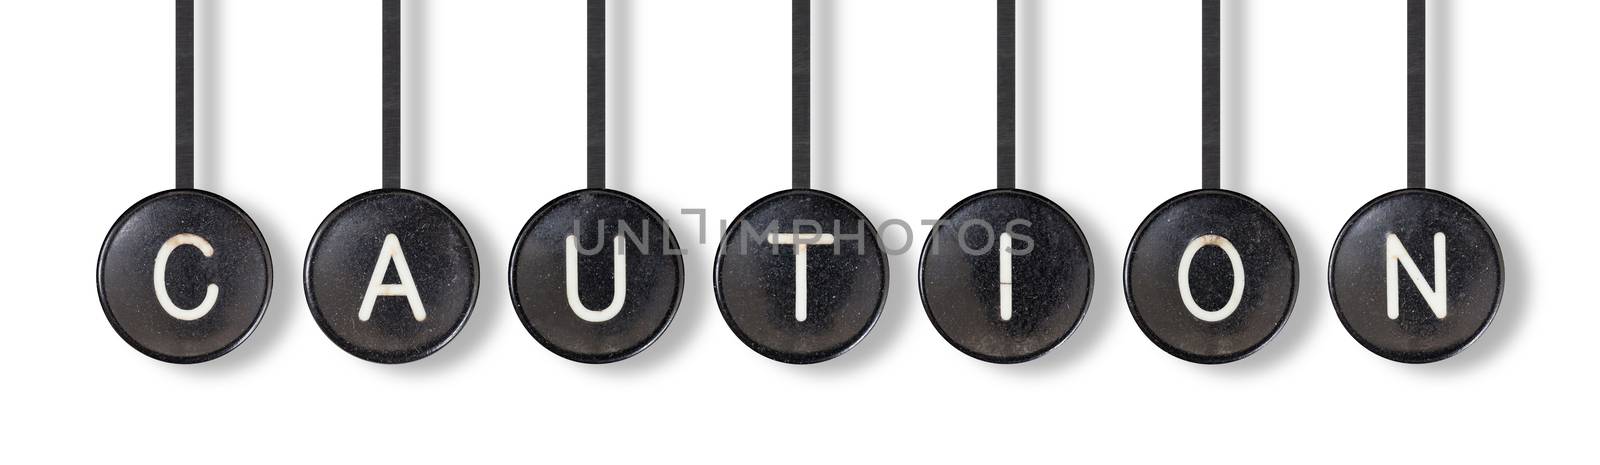 Typewriter buttons, isolated on white background - Caution